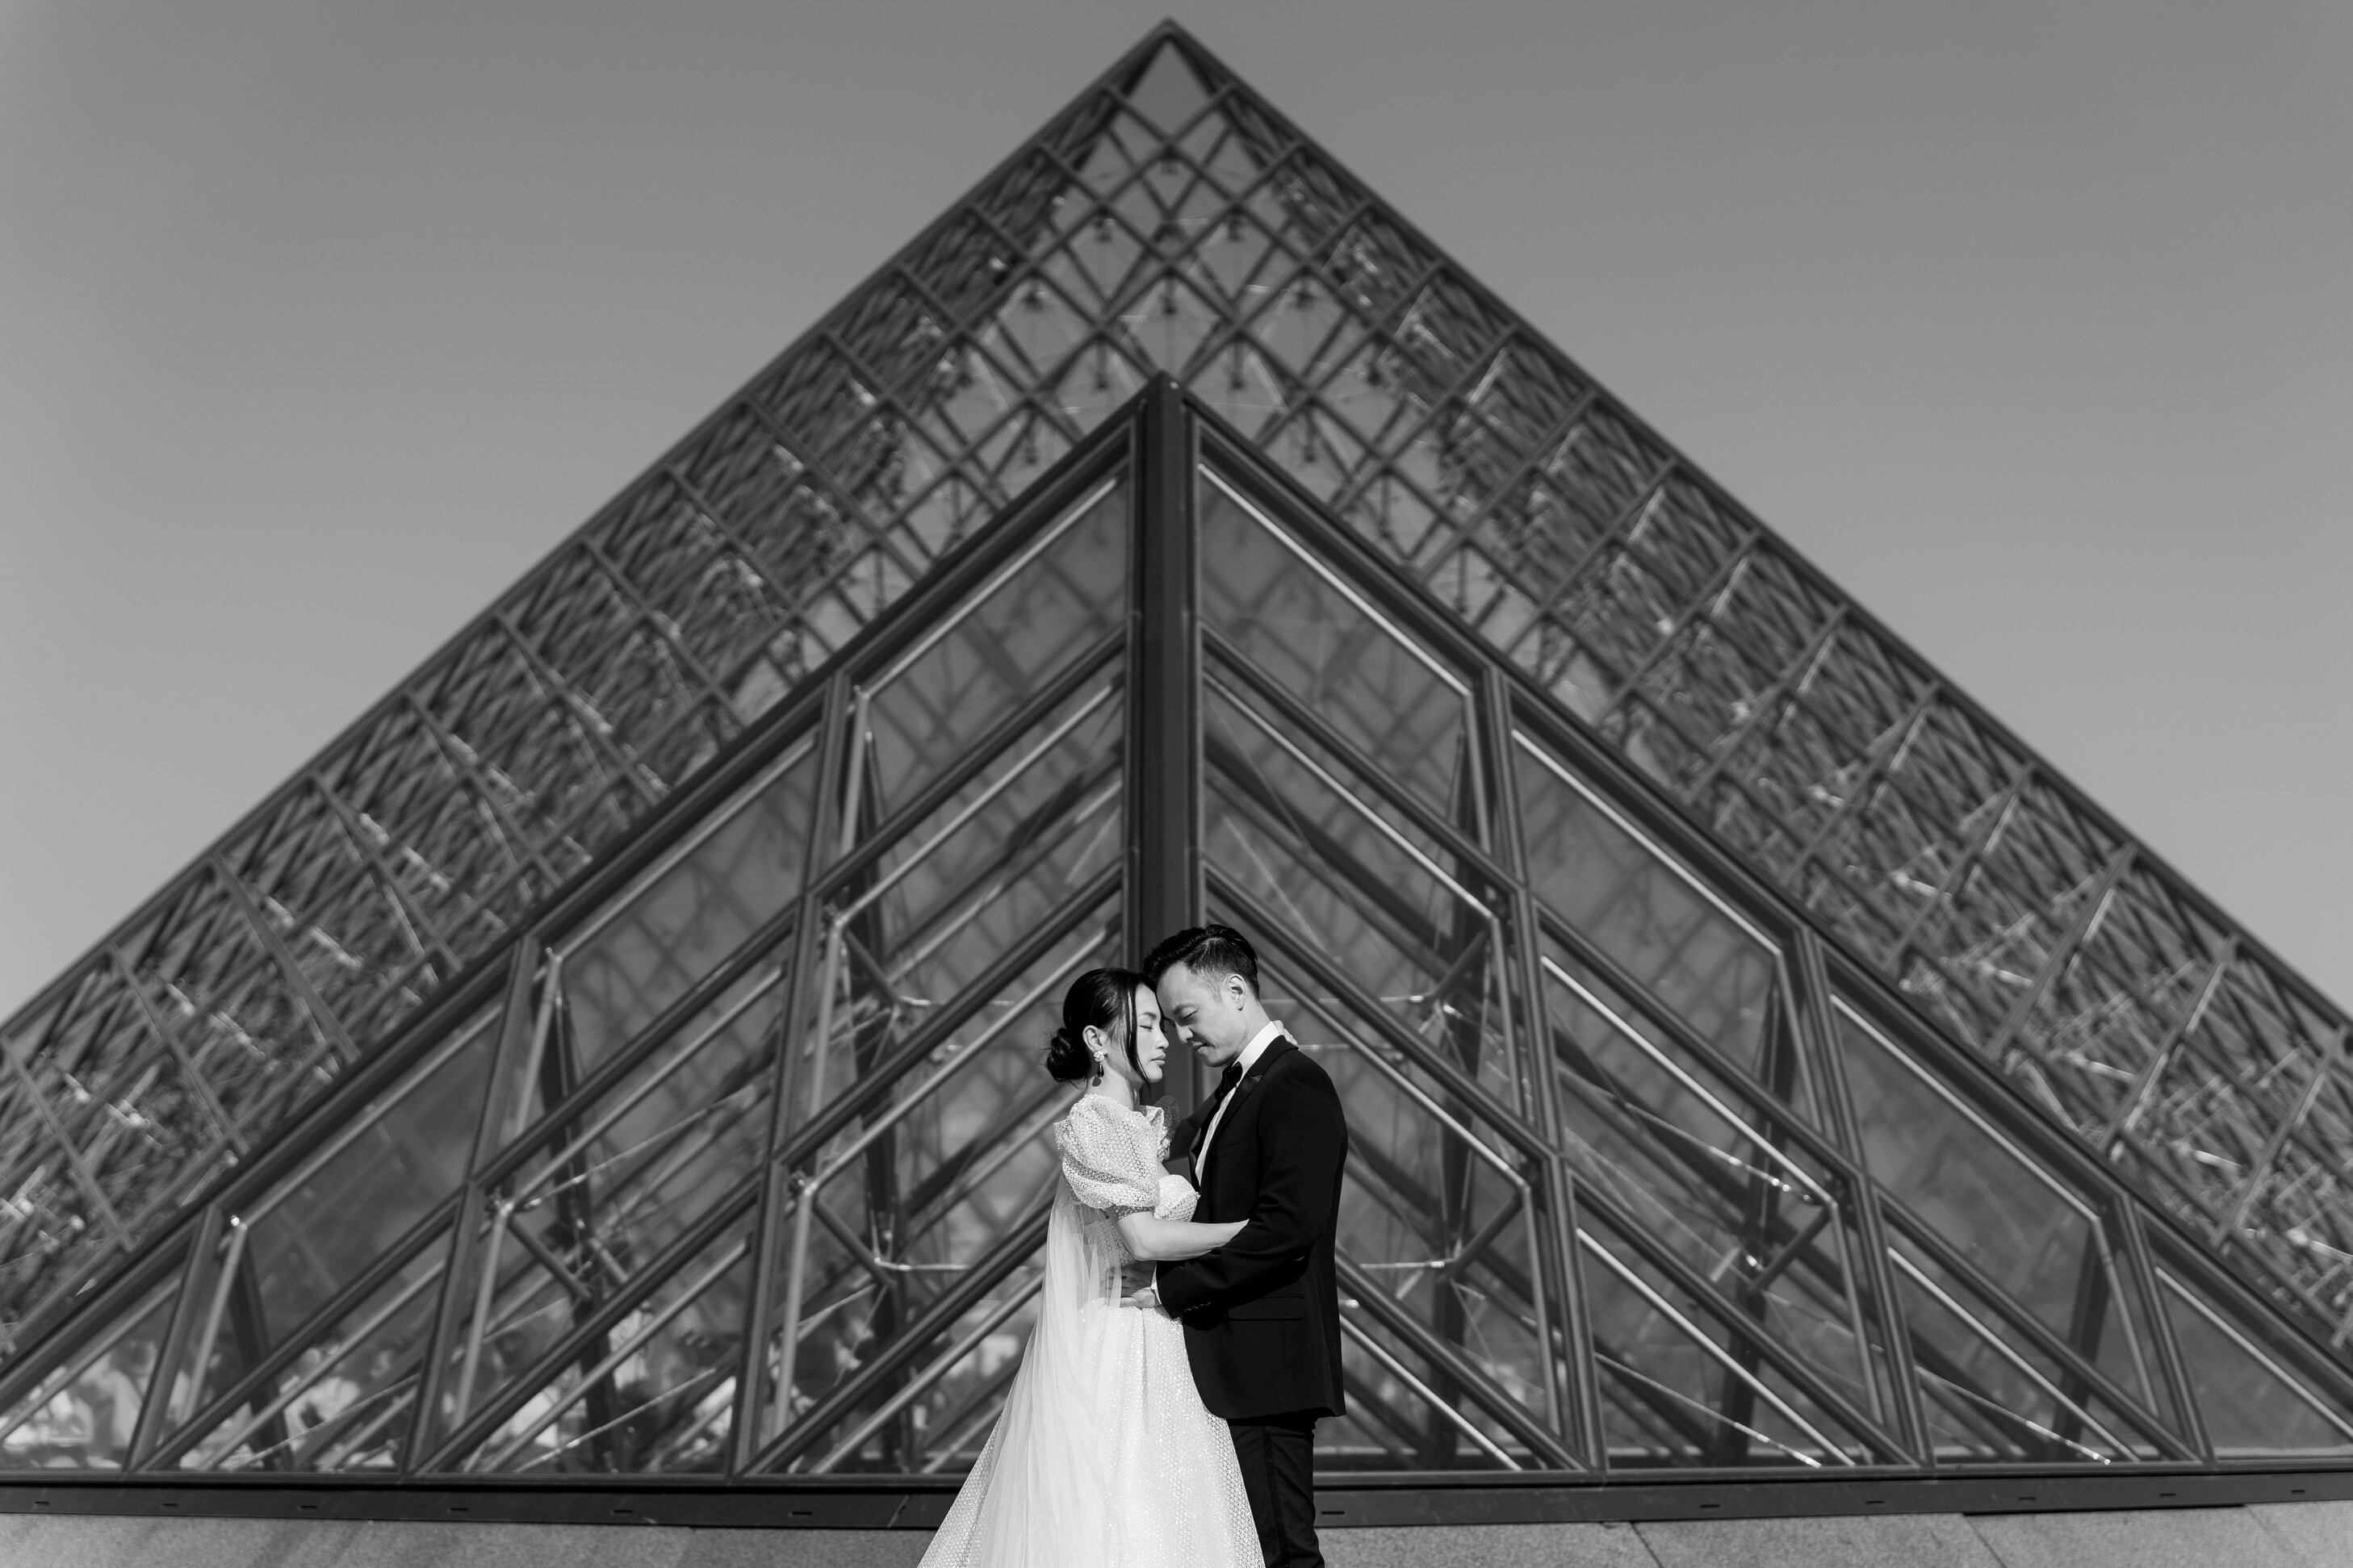 Black and white photo of a bridal couple embracing tenderly in front of the glass pyramid of the Louvre in Paris.